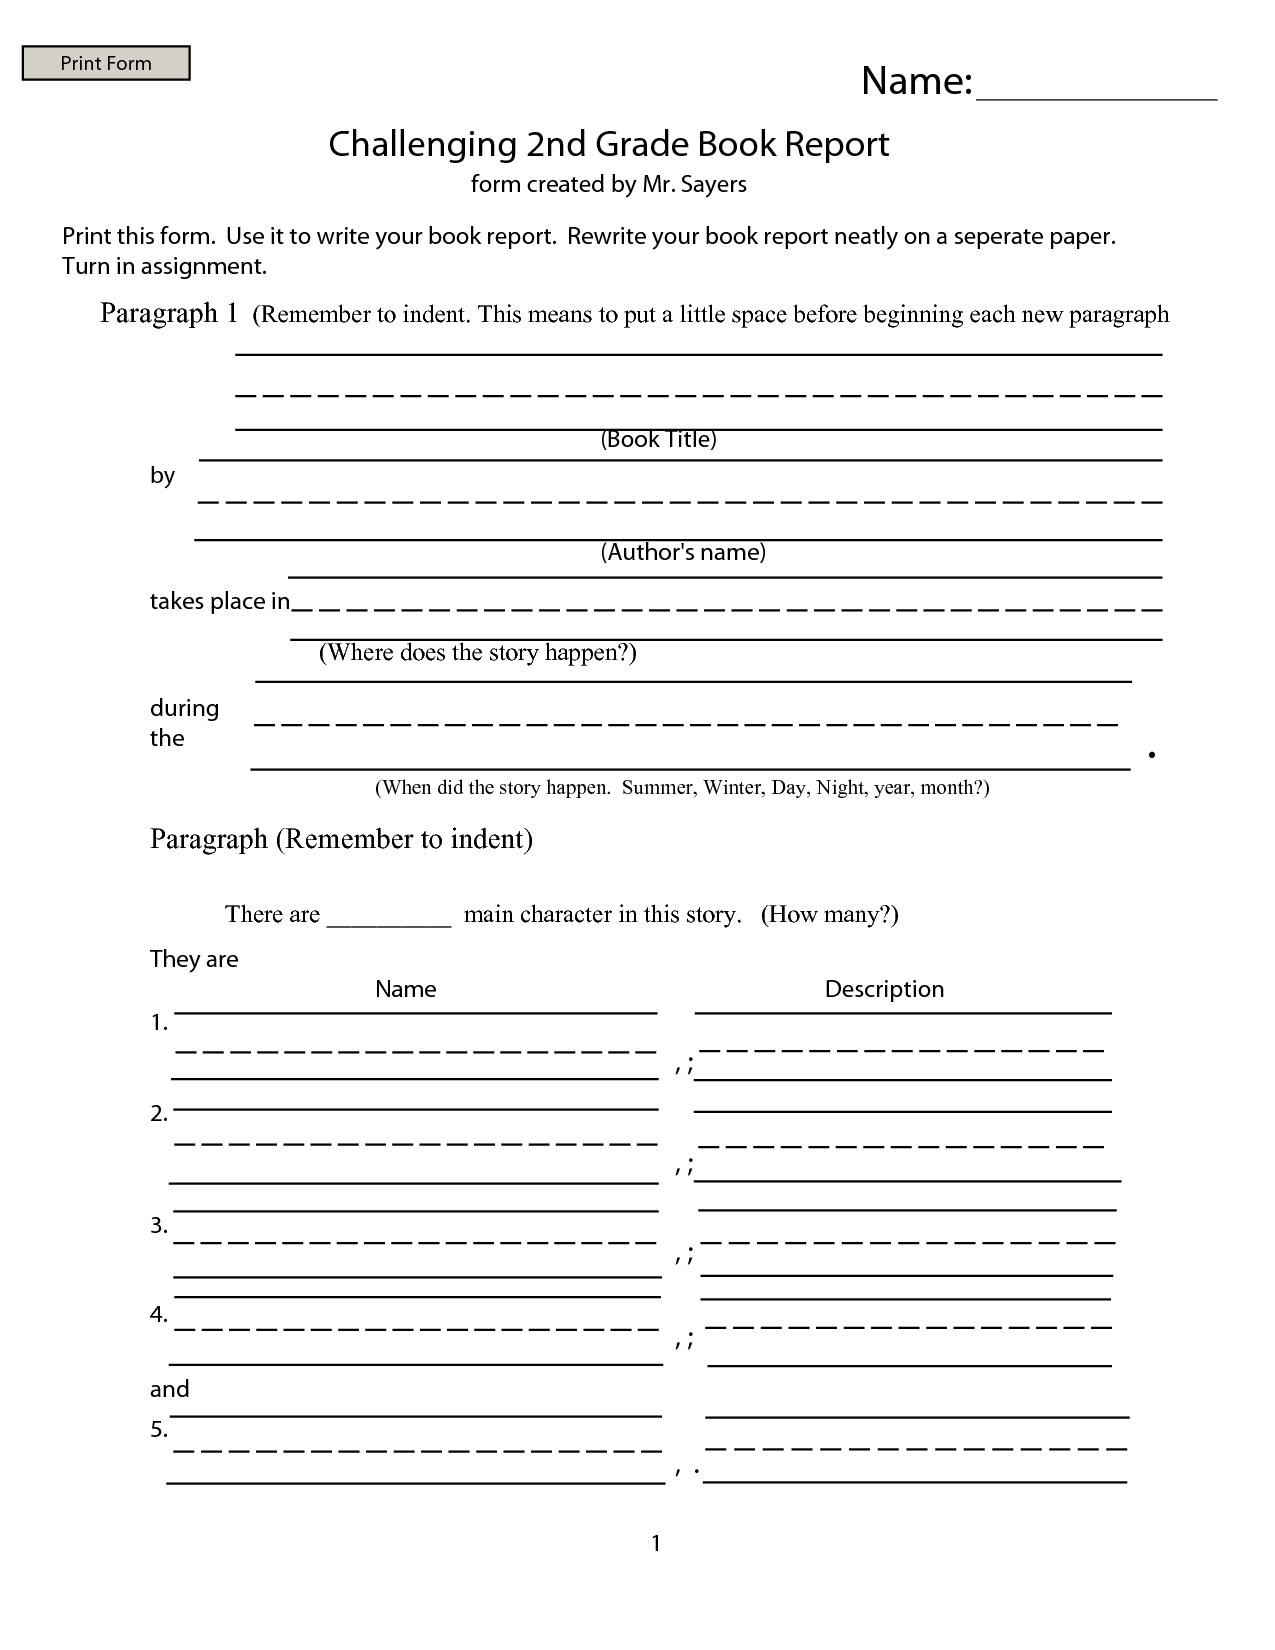 Worksheet Book Report | Printable Worksheets And Activities Throughout Book Report Template 2Nd Grade